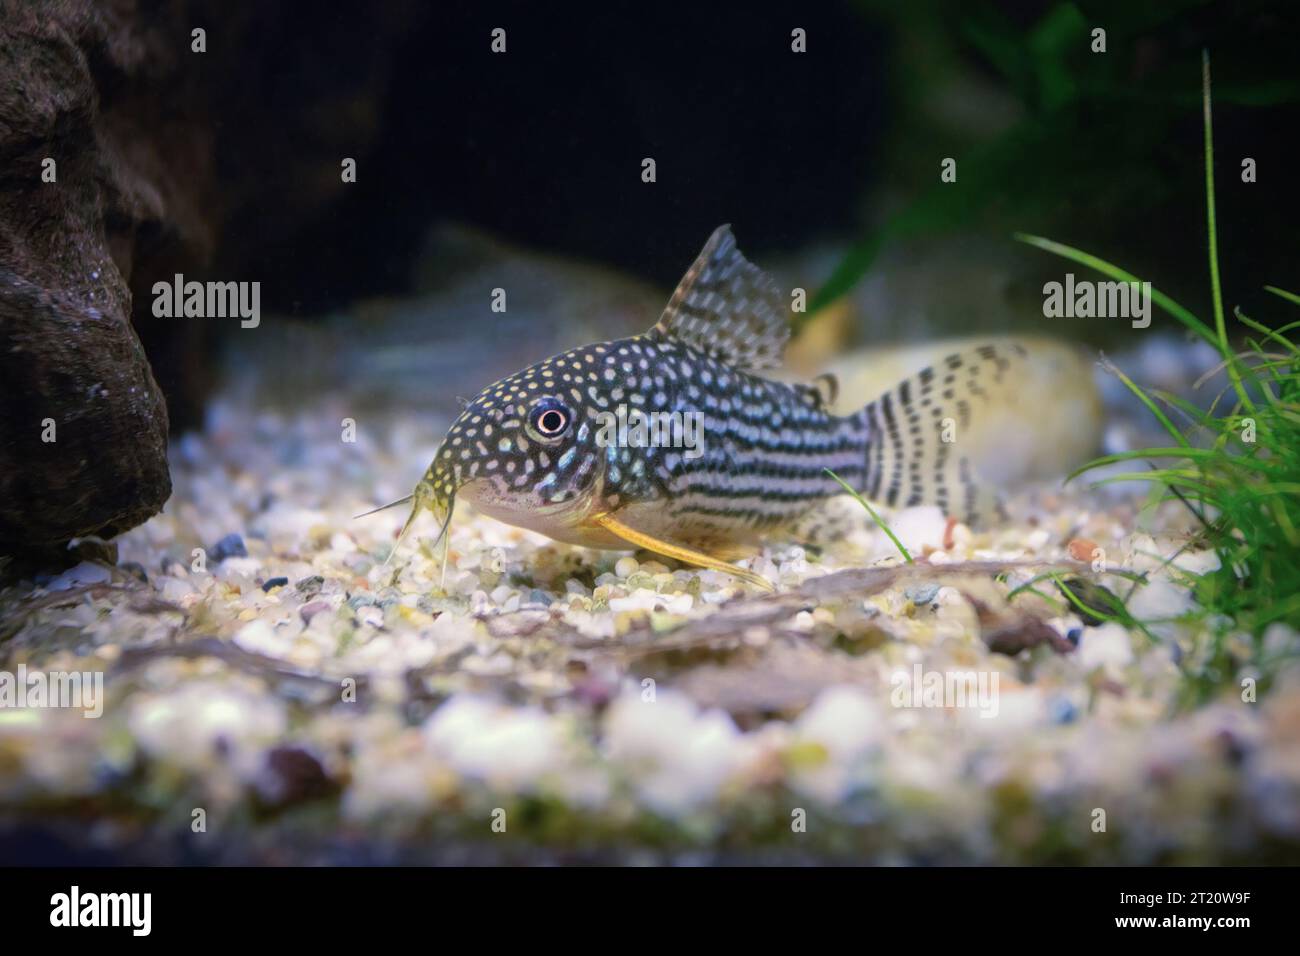 Sterbai cory in natural planted tank (Corydoras sterbai), this is a cute catfish popular in fish tanks Stock Photo